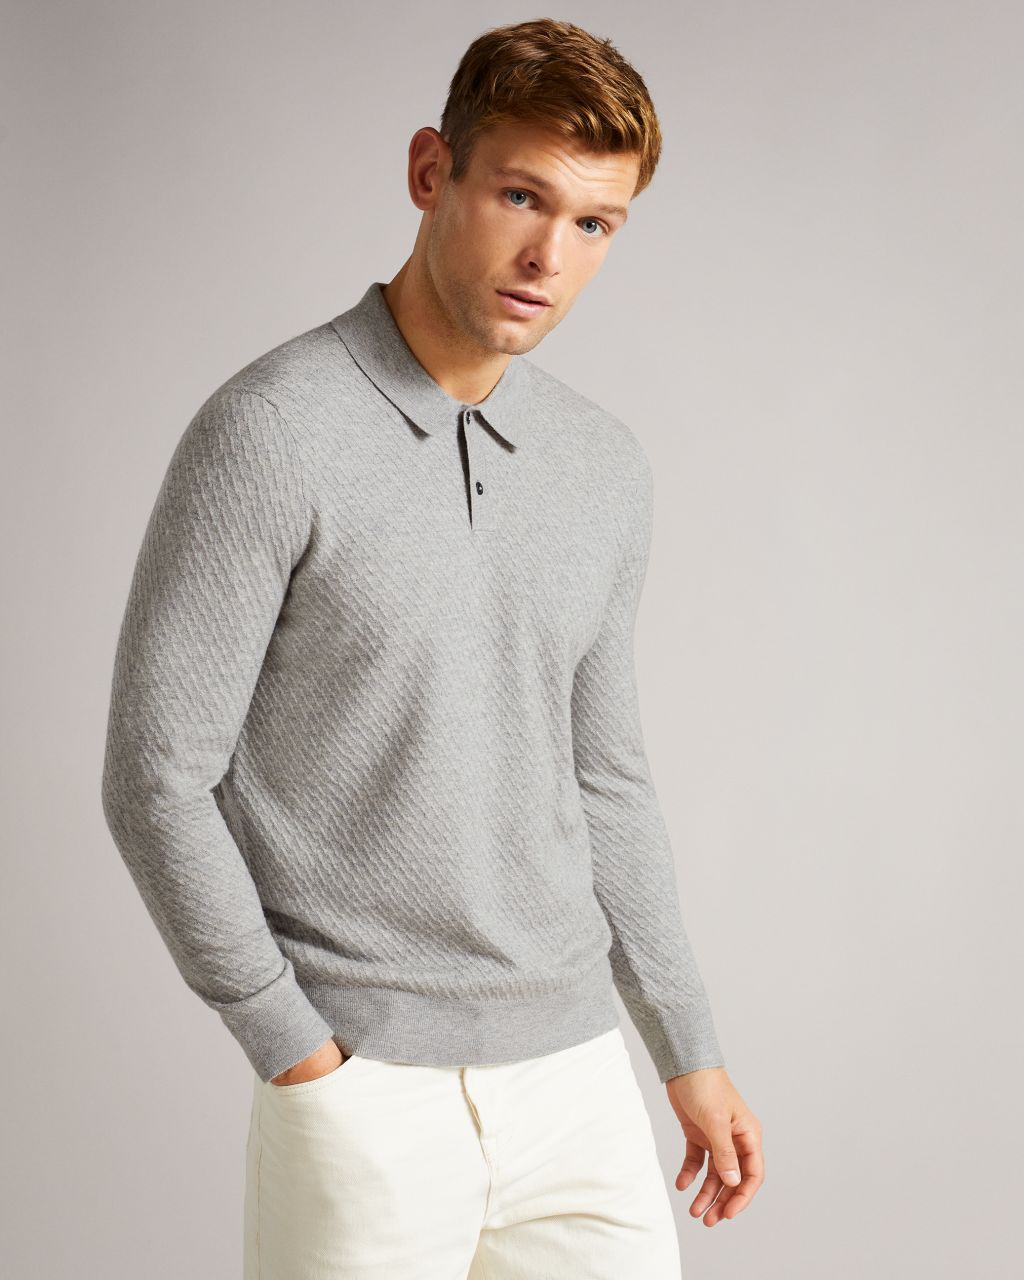 Ted Baker Men's Ls Knitted Textured Polo in Gray Marl, Nixan